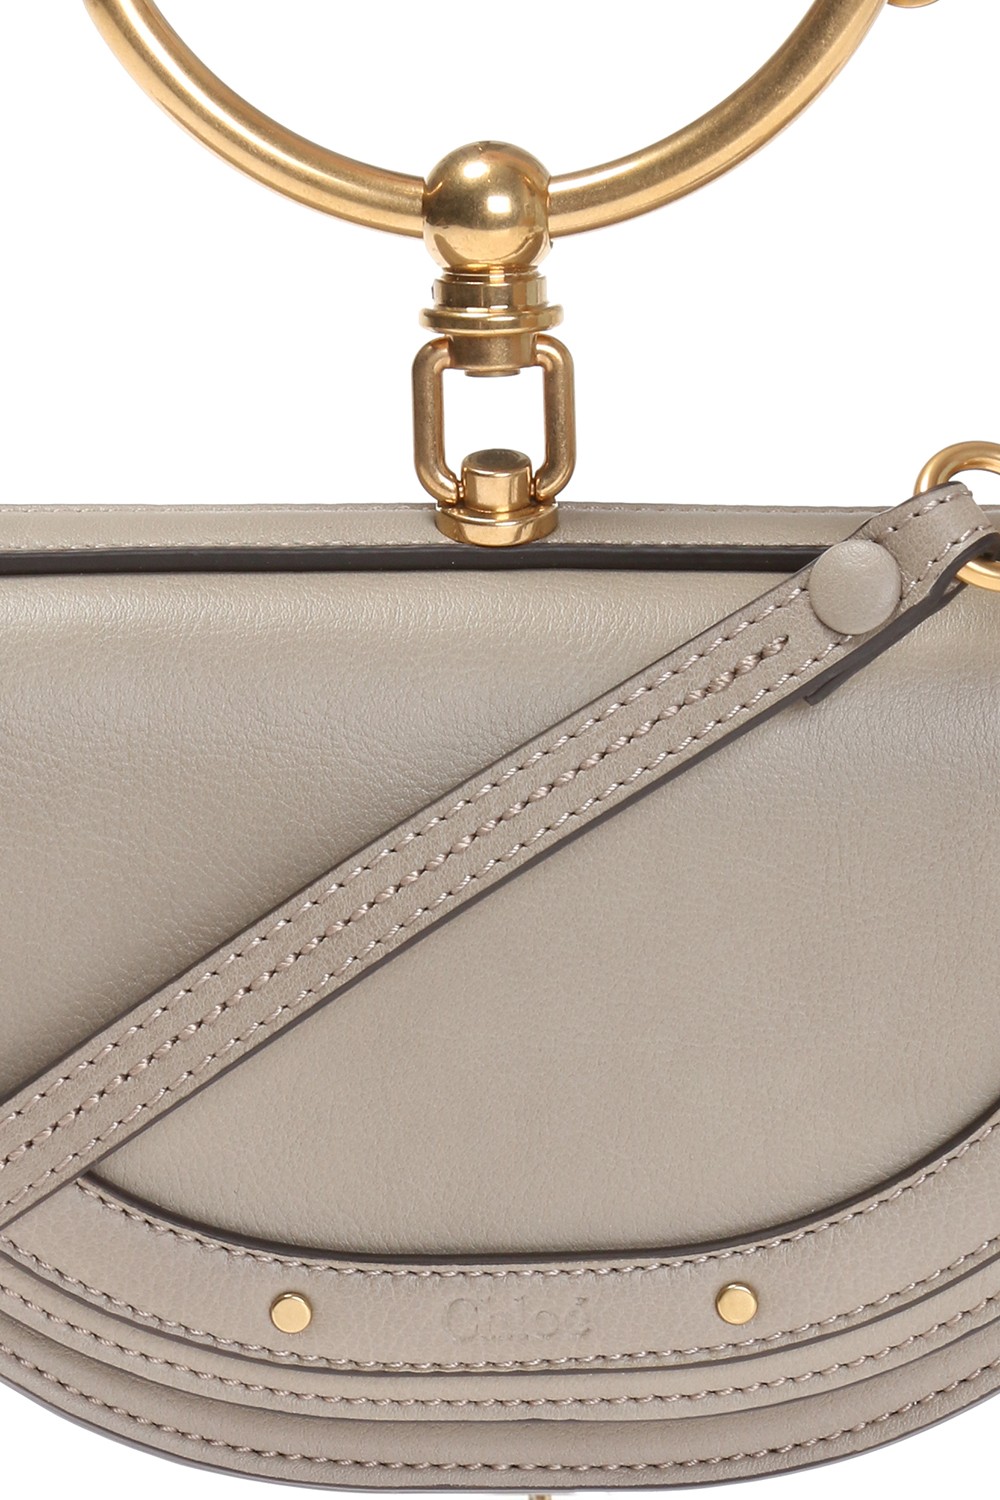 Chloe Nile Minaudiere Mini Motty Grey in Calf Leather with Gold